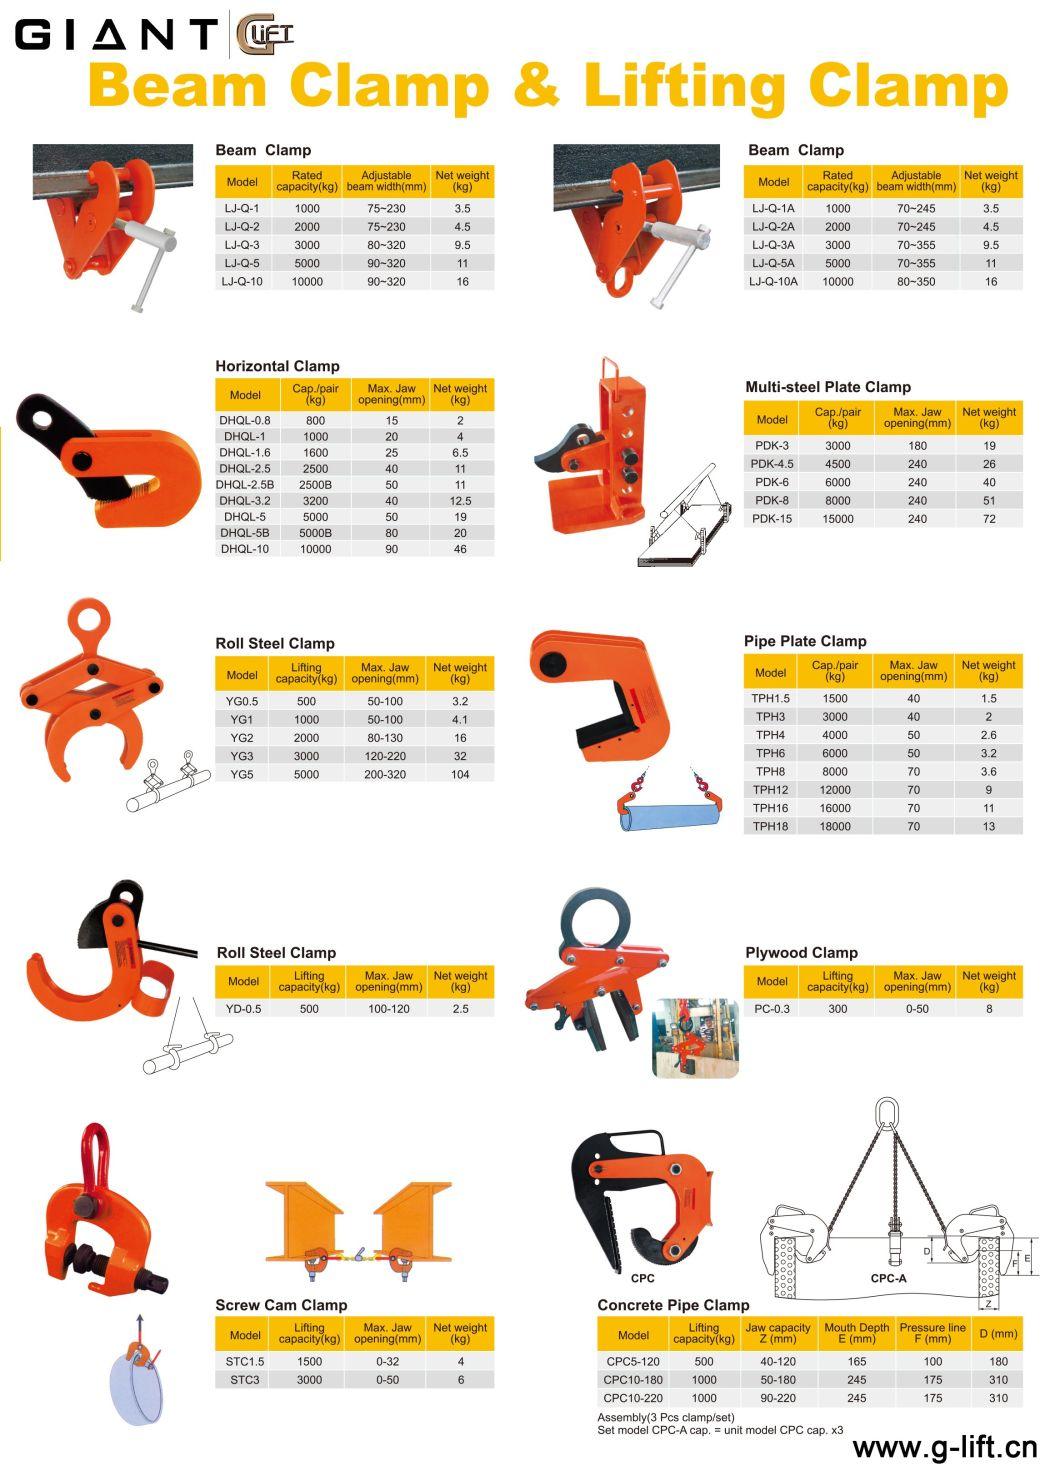 Lifting Beam Clamp for Chain Hoist Steel 1000kg 2000kg 5000kg Vertical Clamp Horizontal Clamp Multi Steel Plate Clamp Roll Steel Clamp Concrete Pipe Clamp